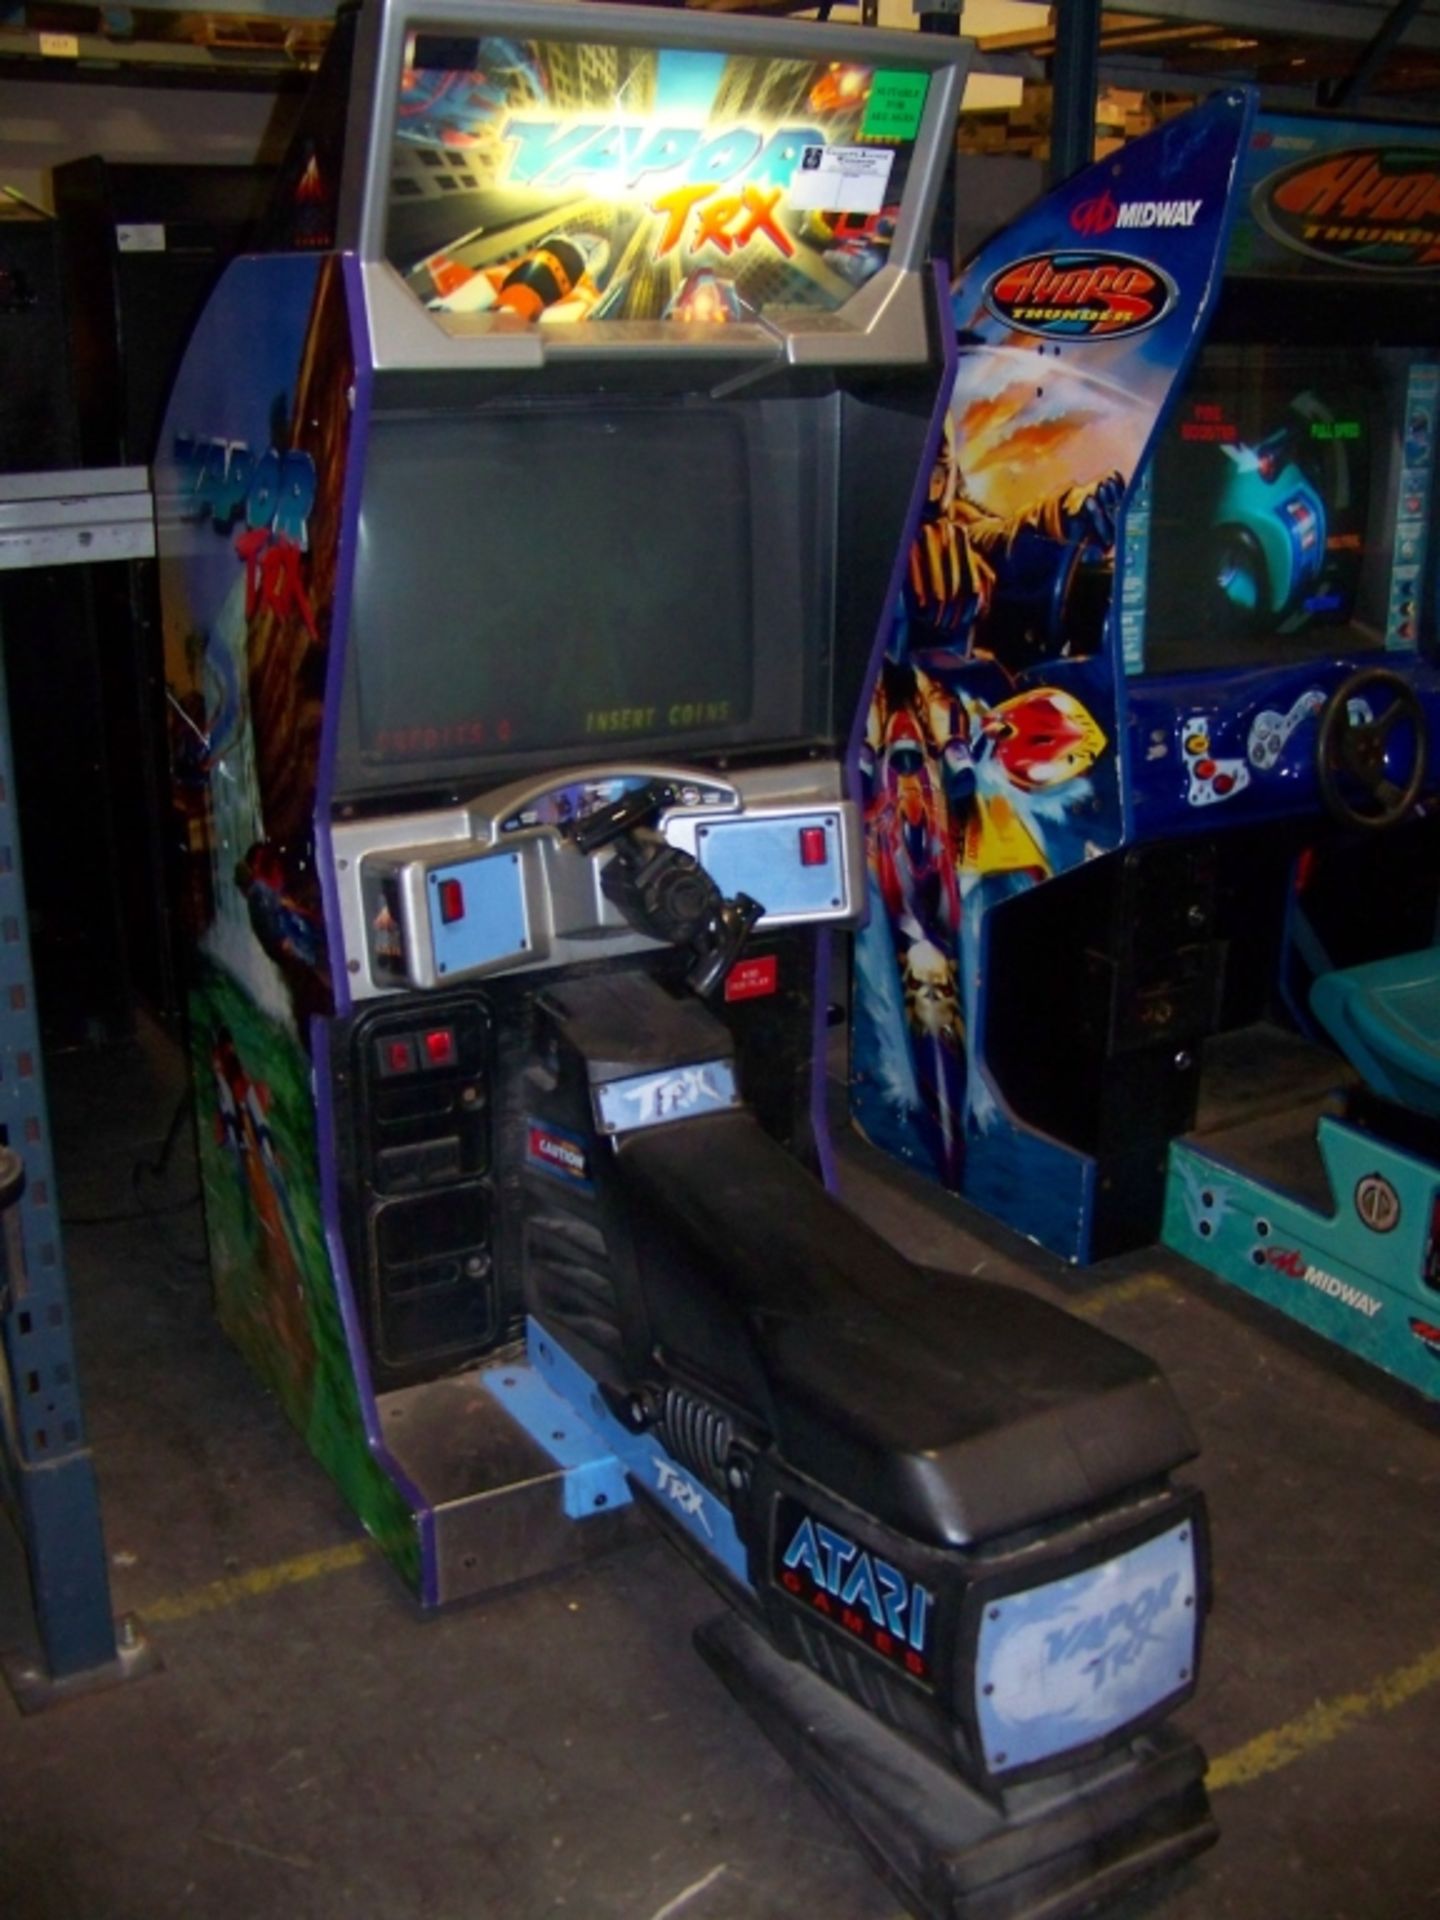 VAPOR TRX RACING ARCADE GAME ATARI Item is in used condition. Evidence of wear and commercial - Image 3 of 3